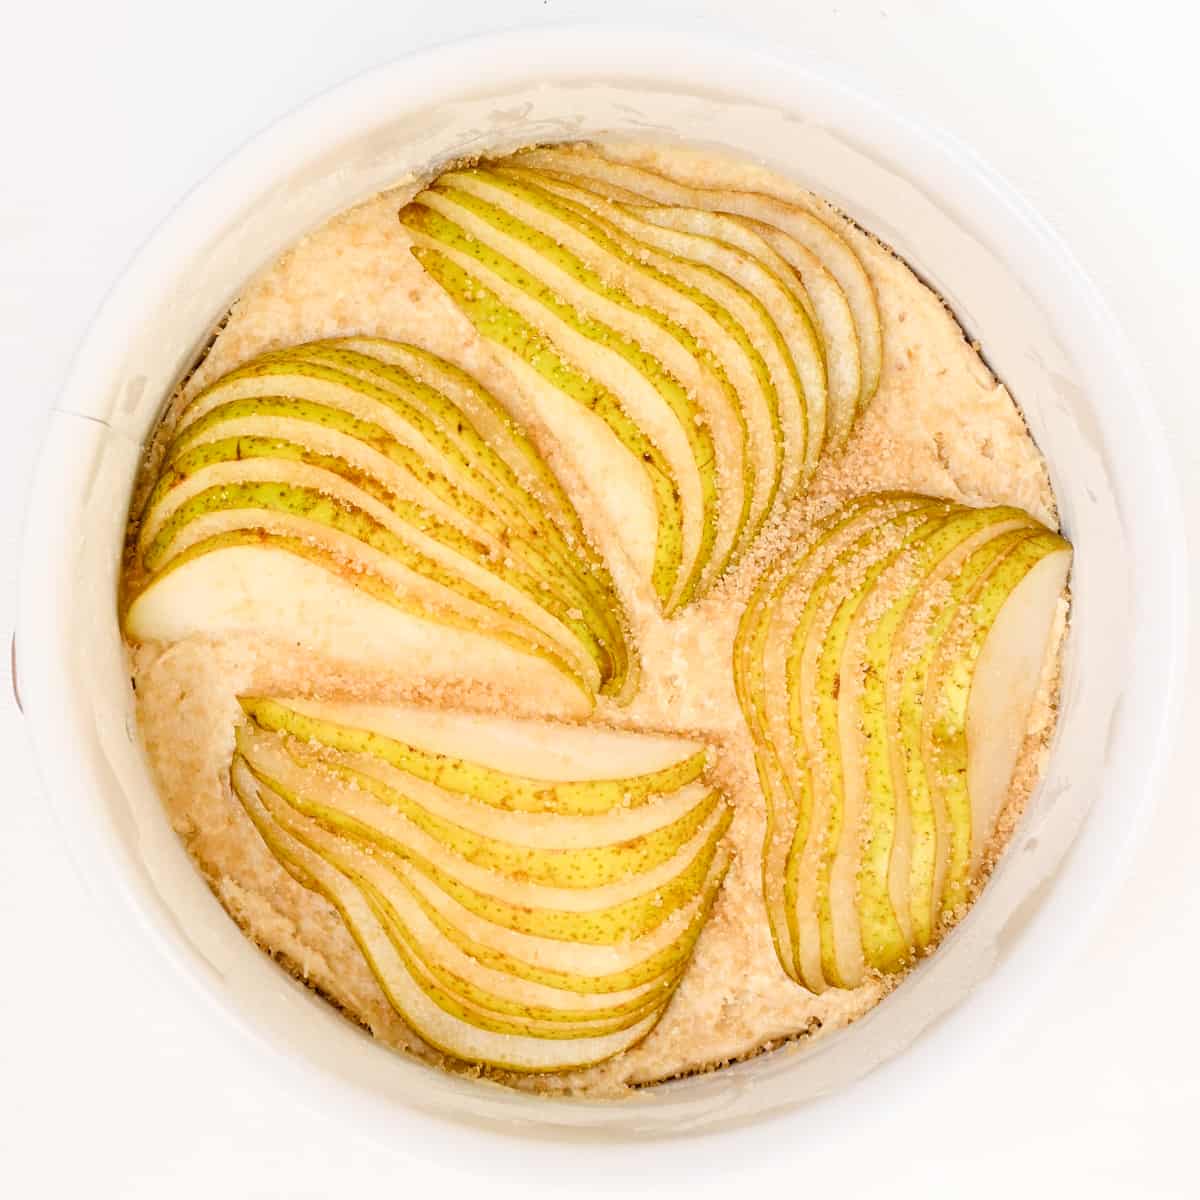 Slices of pears artfully arranged on top of the batter in a small springform tin.